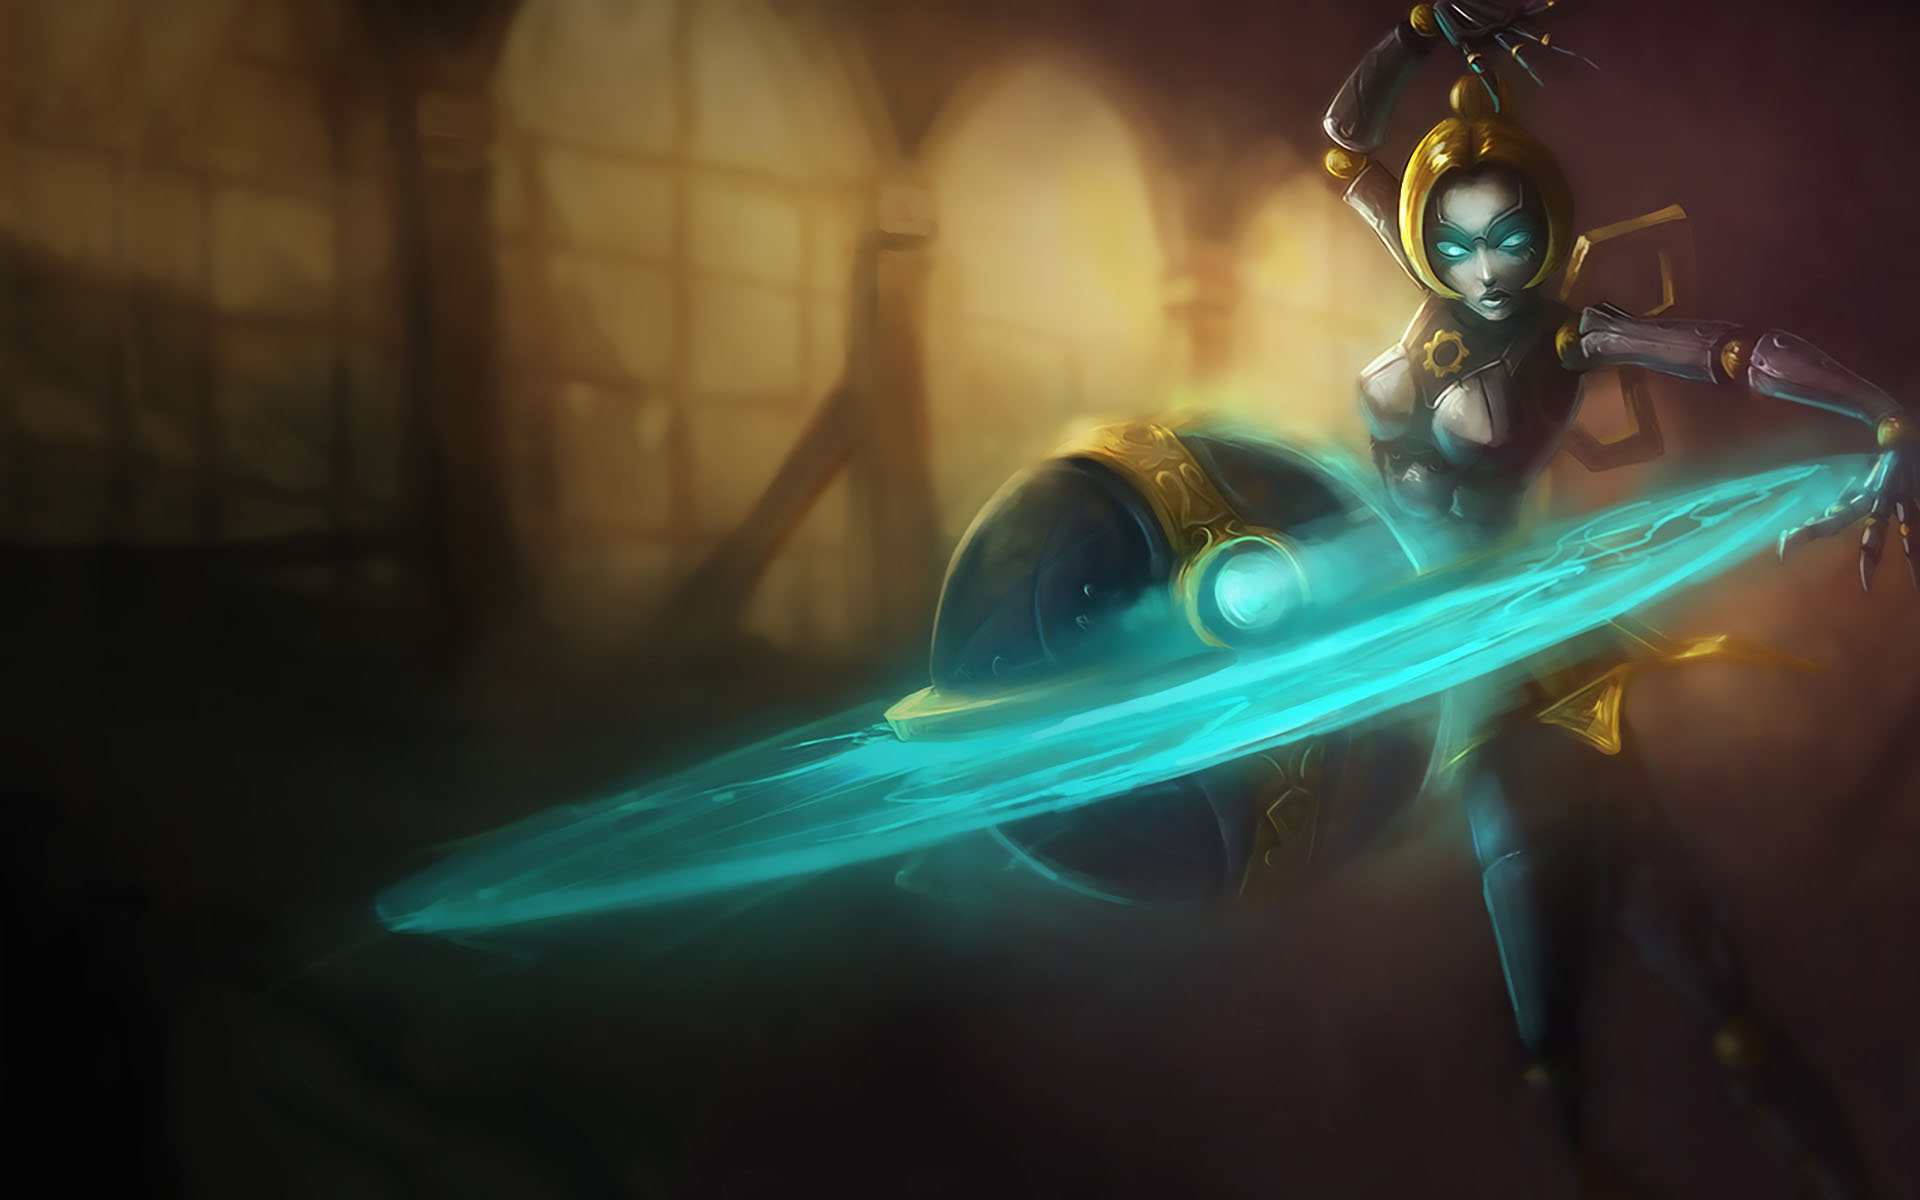 Orianna, The Lady of Clockwork - Game Art, Cosplays and an Overview1920 x 1200